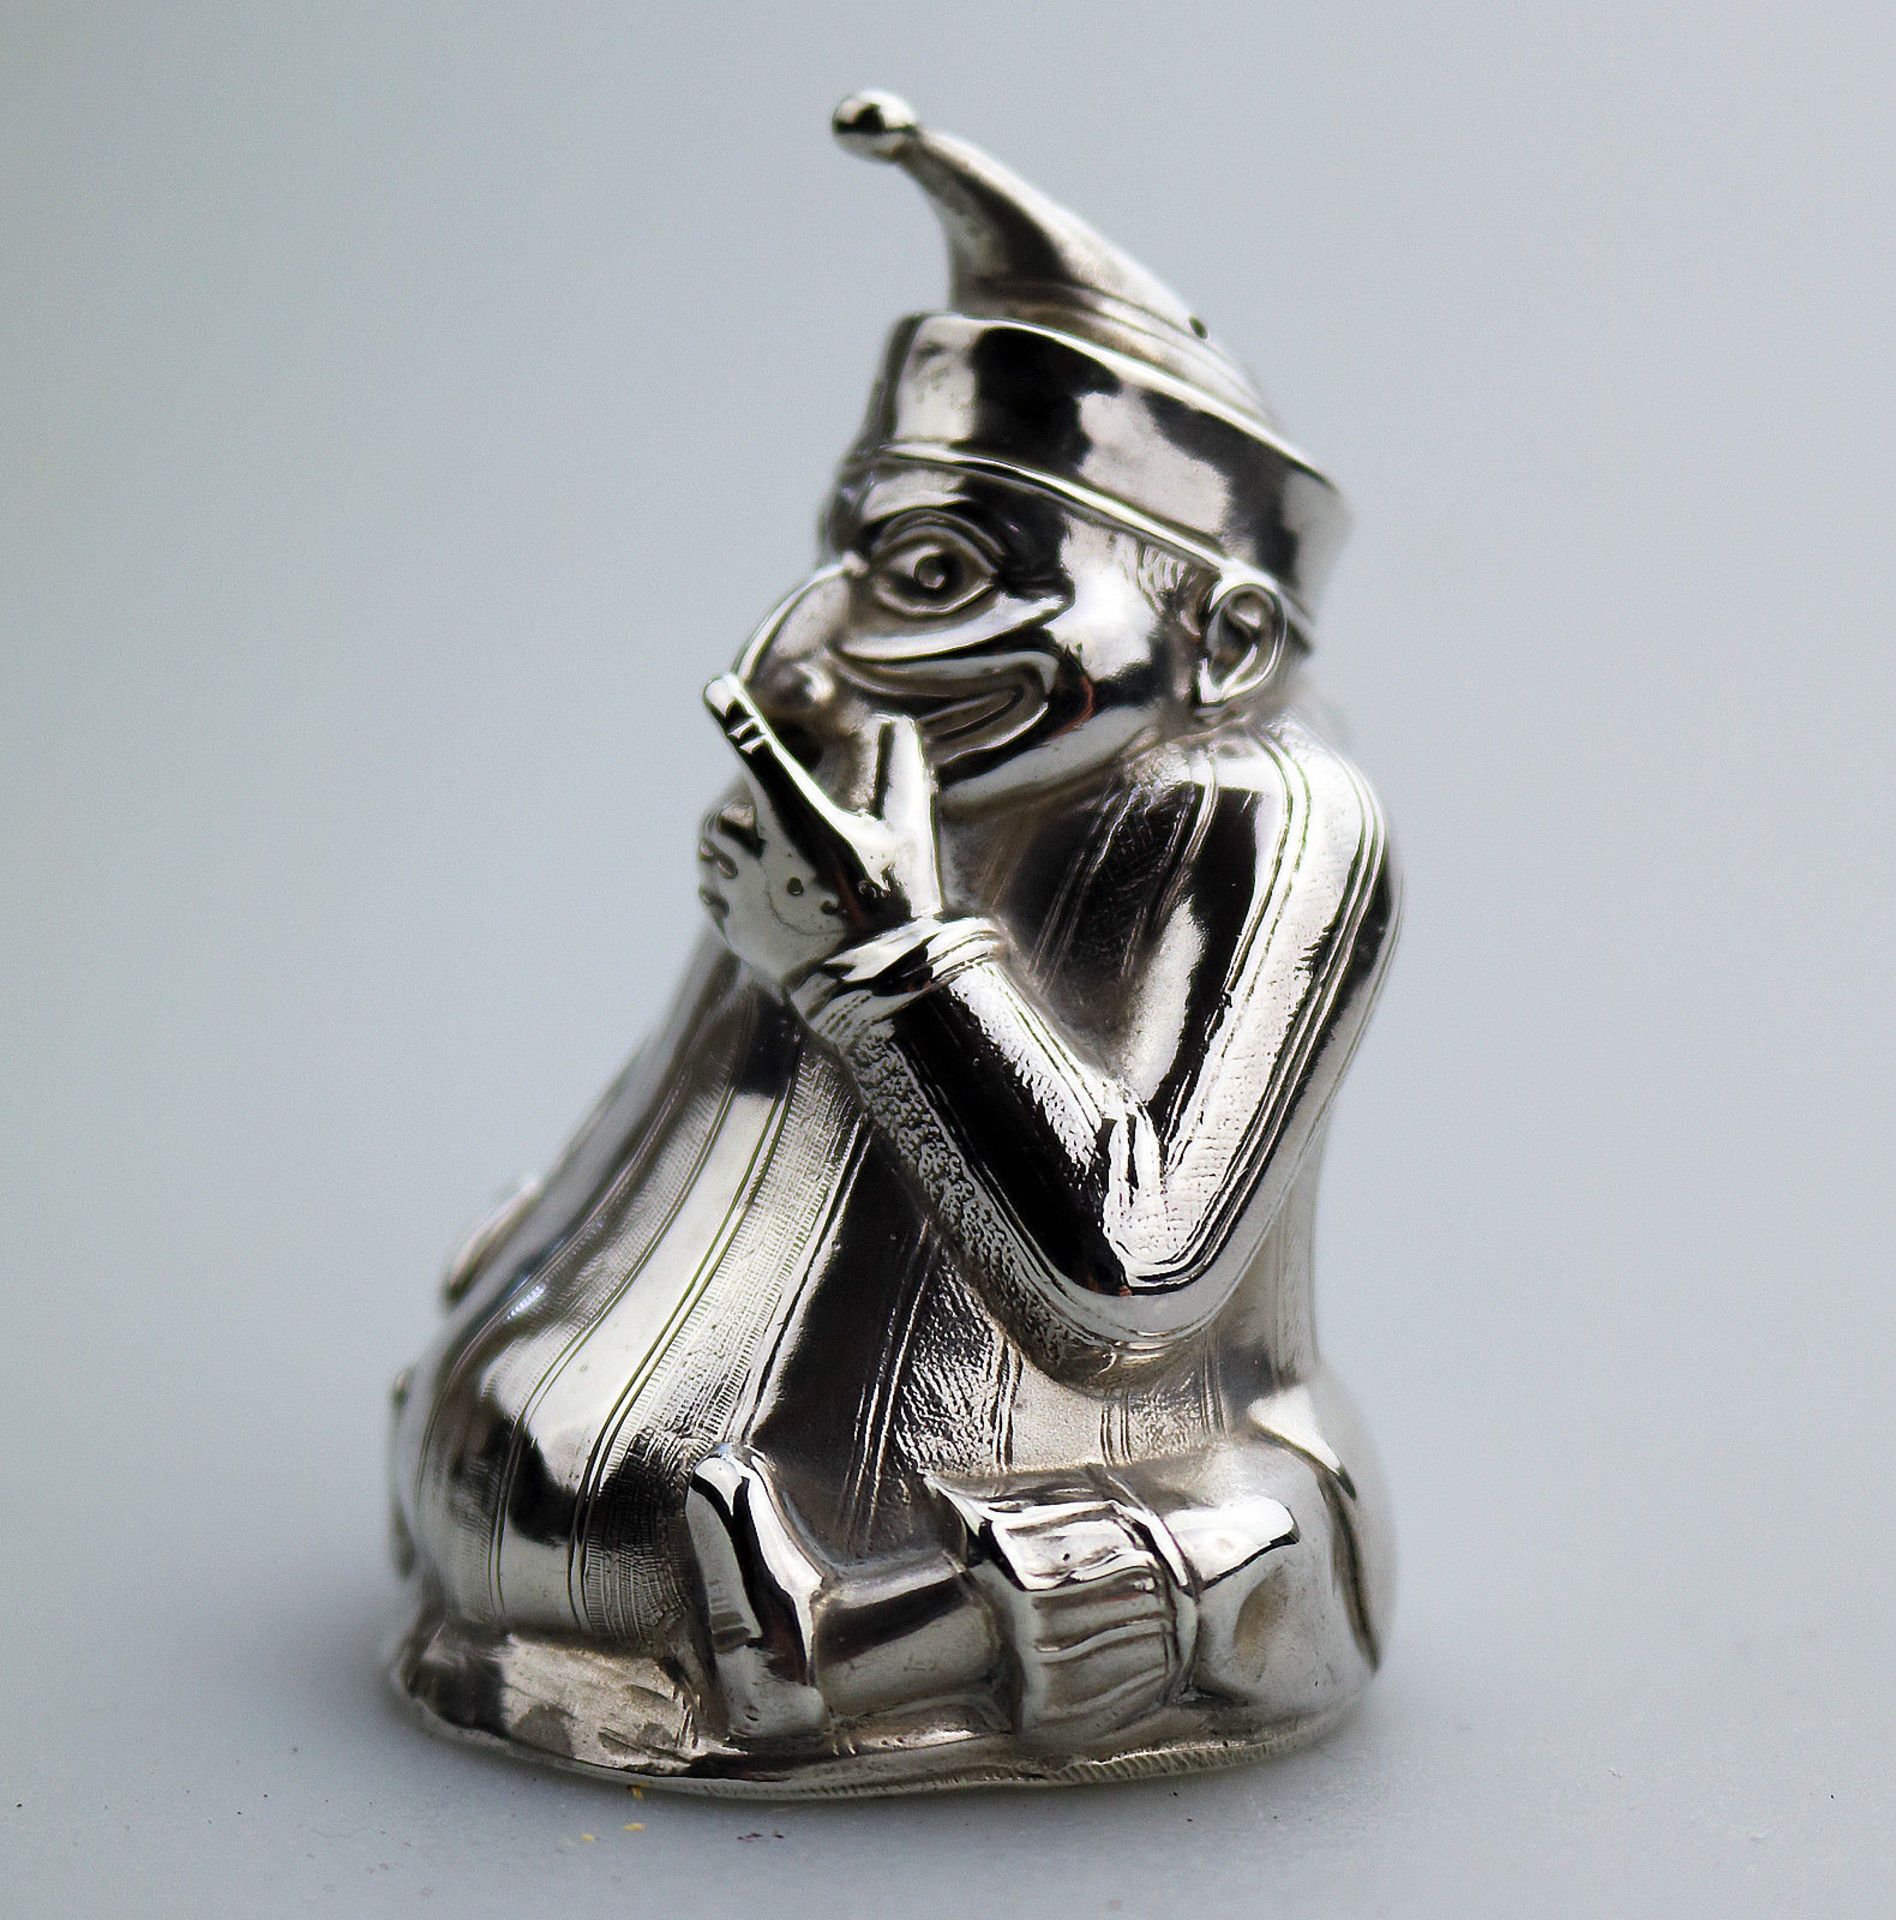 A rare solid silver novelty Mr Punch Pepper shaker by William Sparrow C.1903 - Image 6 of 8